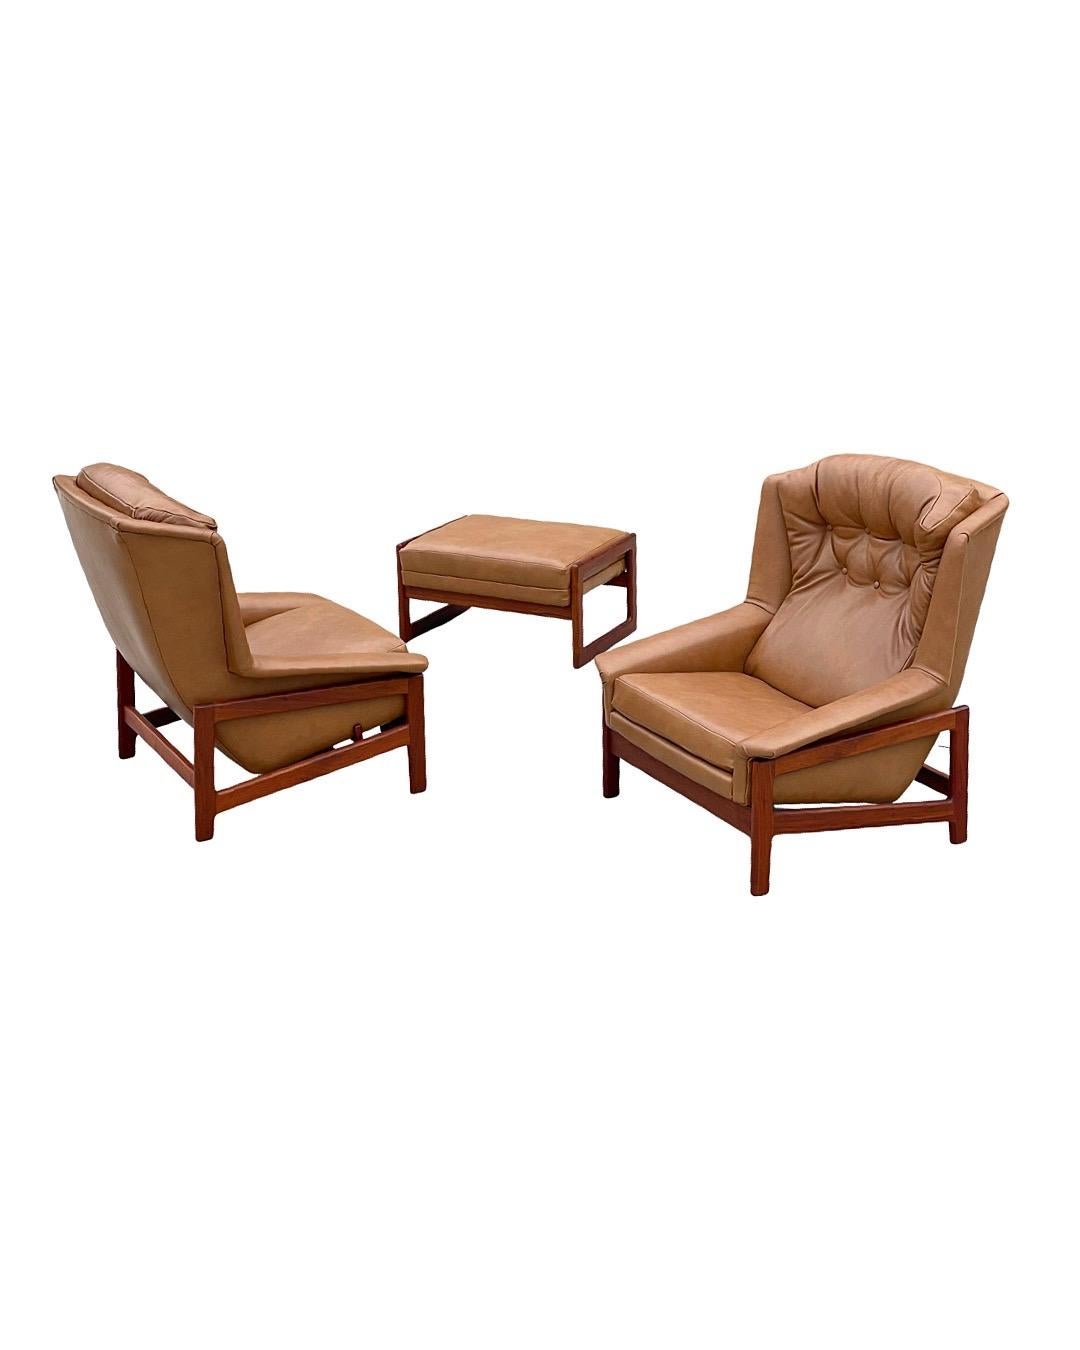 Mid-Century Modern Midcentury Reclining Lounge Chairs in Leather + Walnut by Folke Ohlsson for DUX For Sale